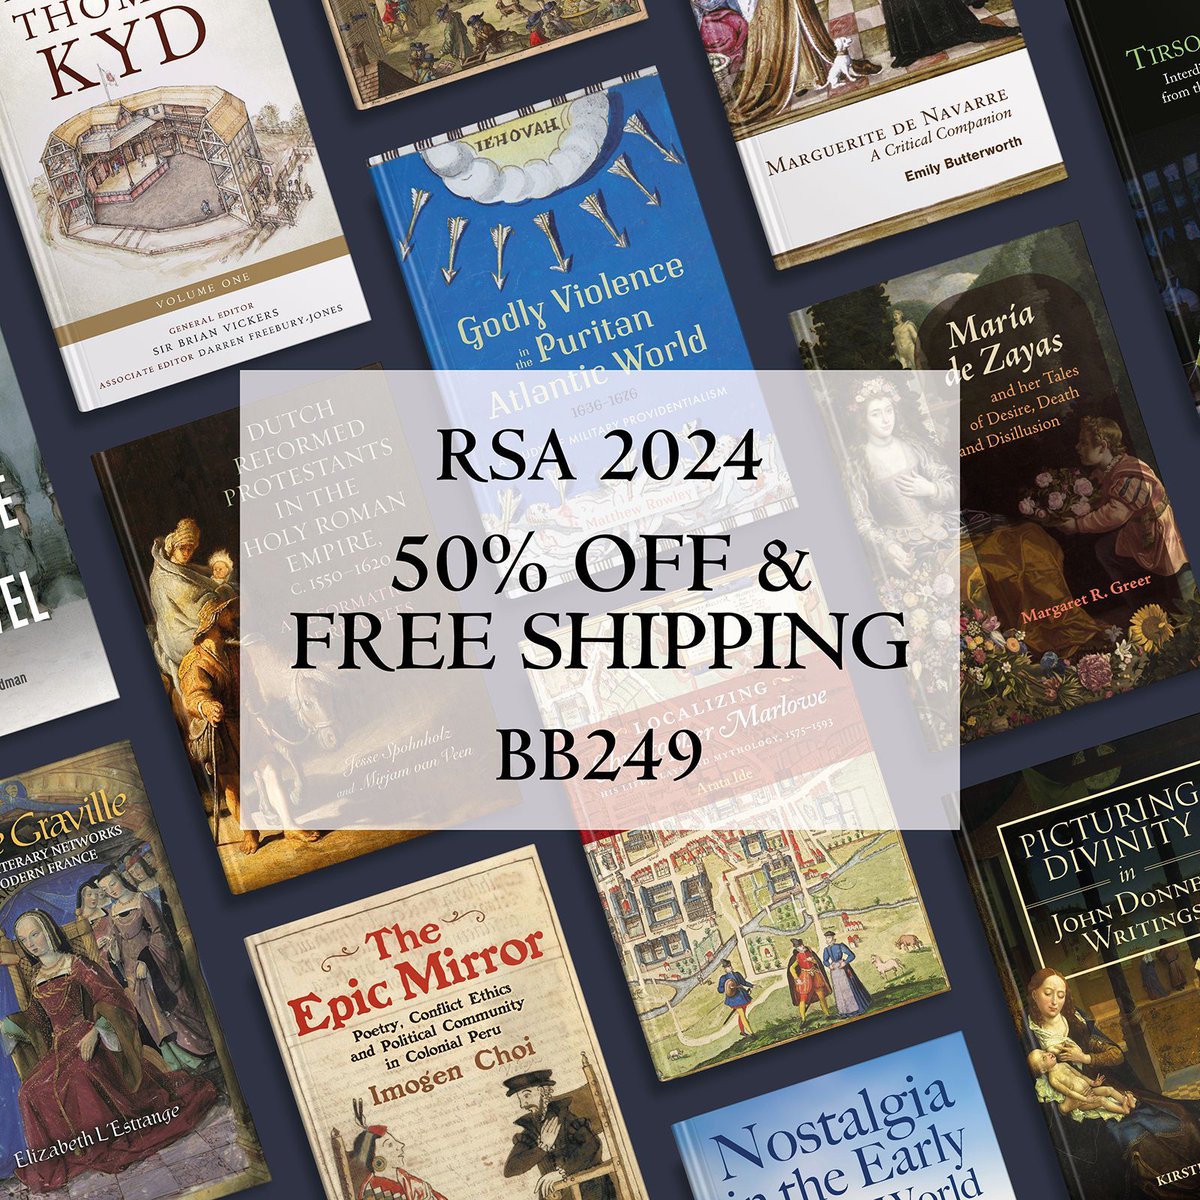 Just 5 days left to get 50% off & free shipping at our #RenSA2024 virtual booth! Use code BB249 before 30 April 2024 to save. Find the full list of titles here: buff.ly/49Z0kGY @RSAorg @DrPastonsRUs #RenTwitter #earlymoderntwitter #twitterstorians